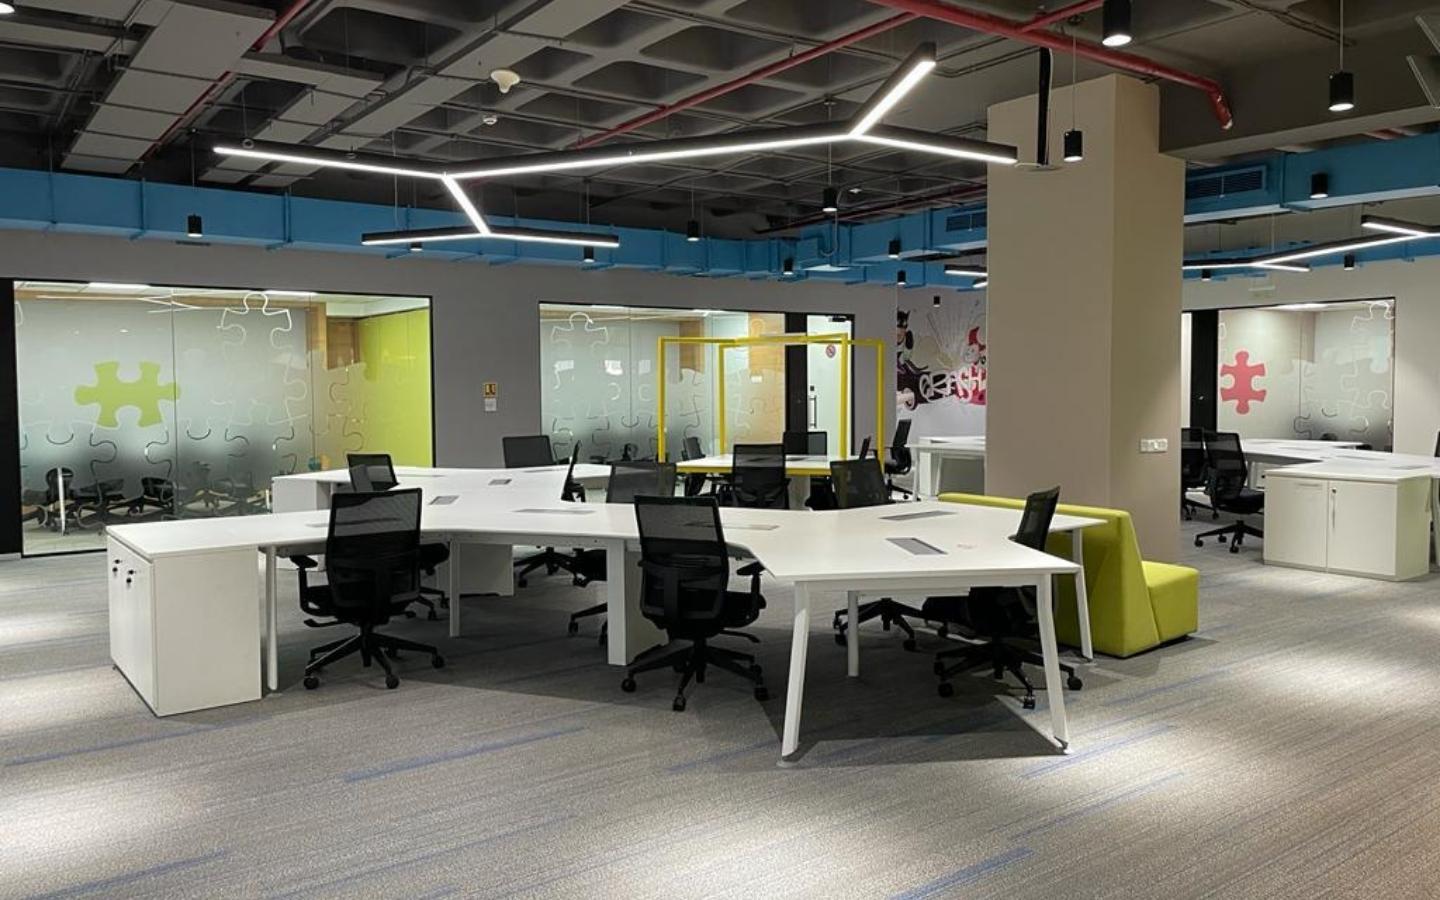 Get worry-less Office space for rent in Whitefield with Flick Spaces.